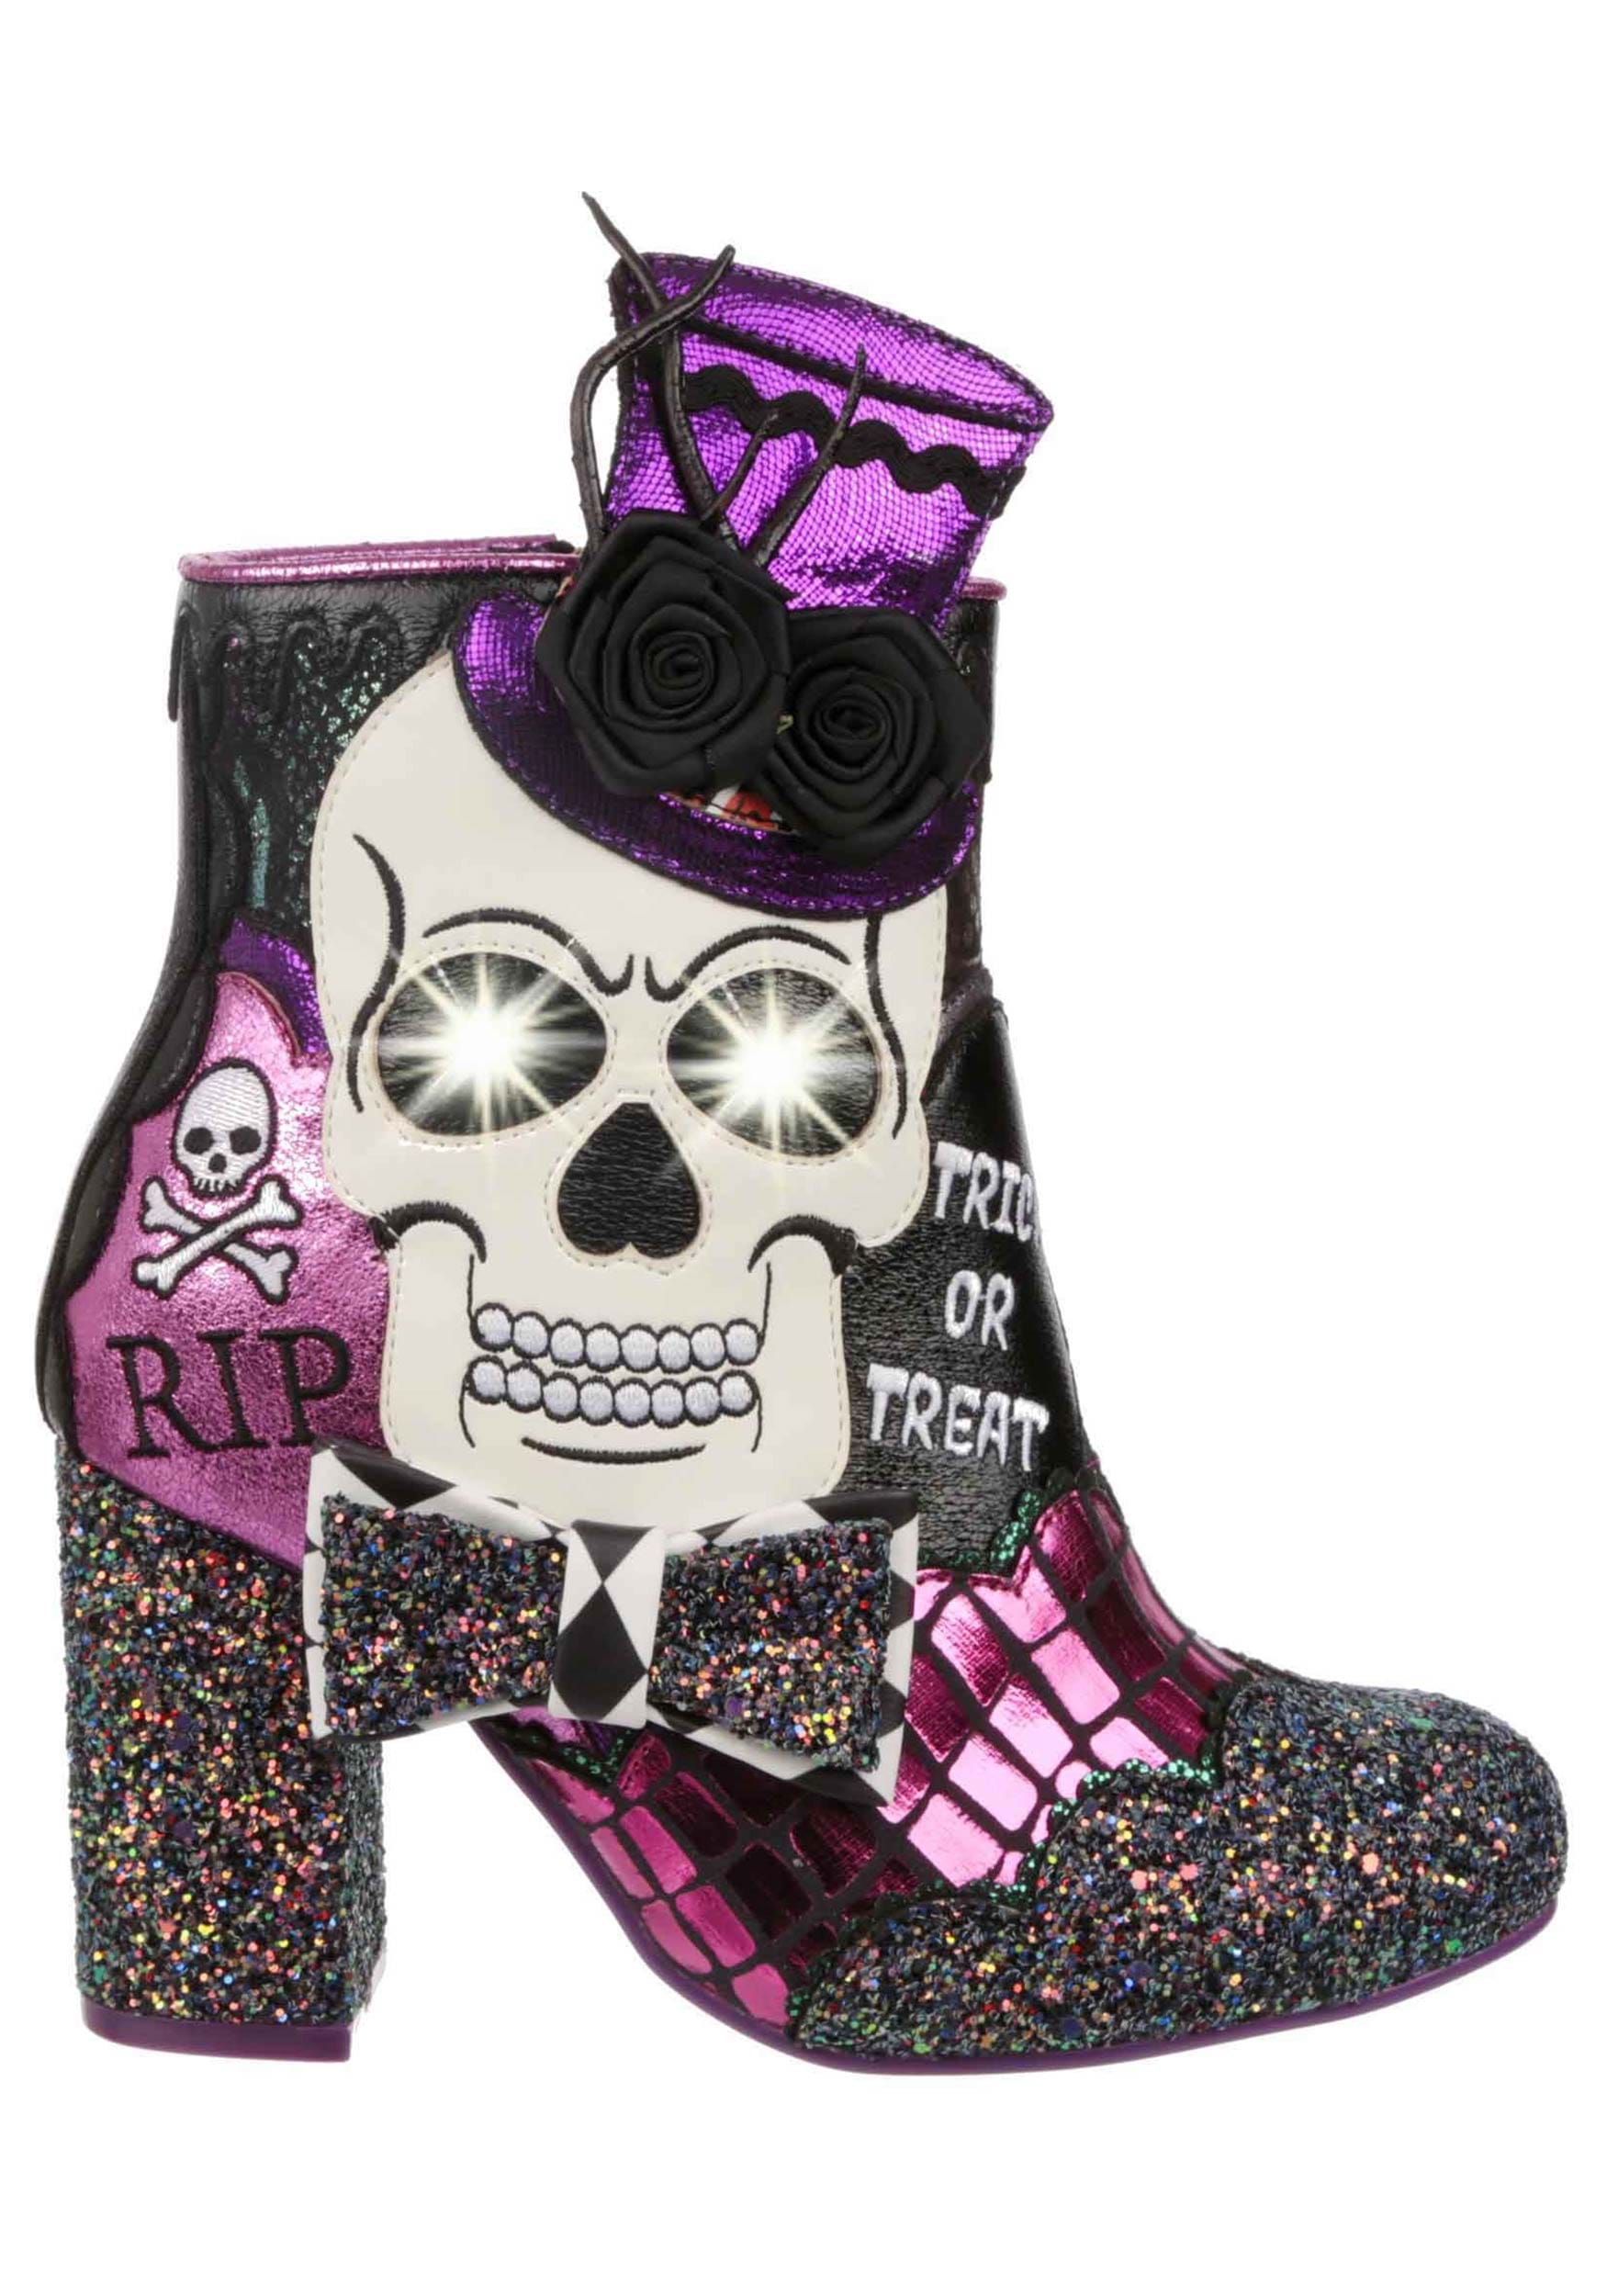 Dance of the Dead Ankle Boot Heel by Irregular Choice